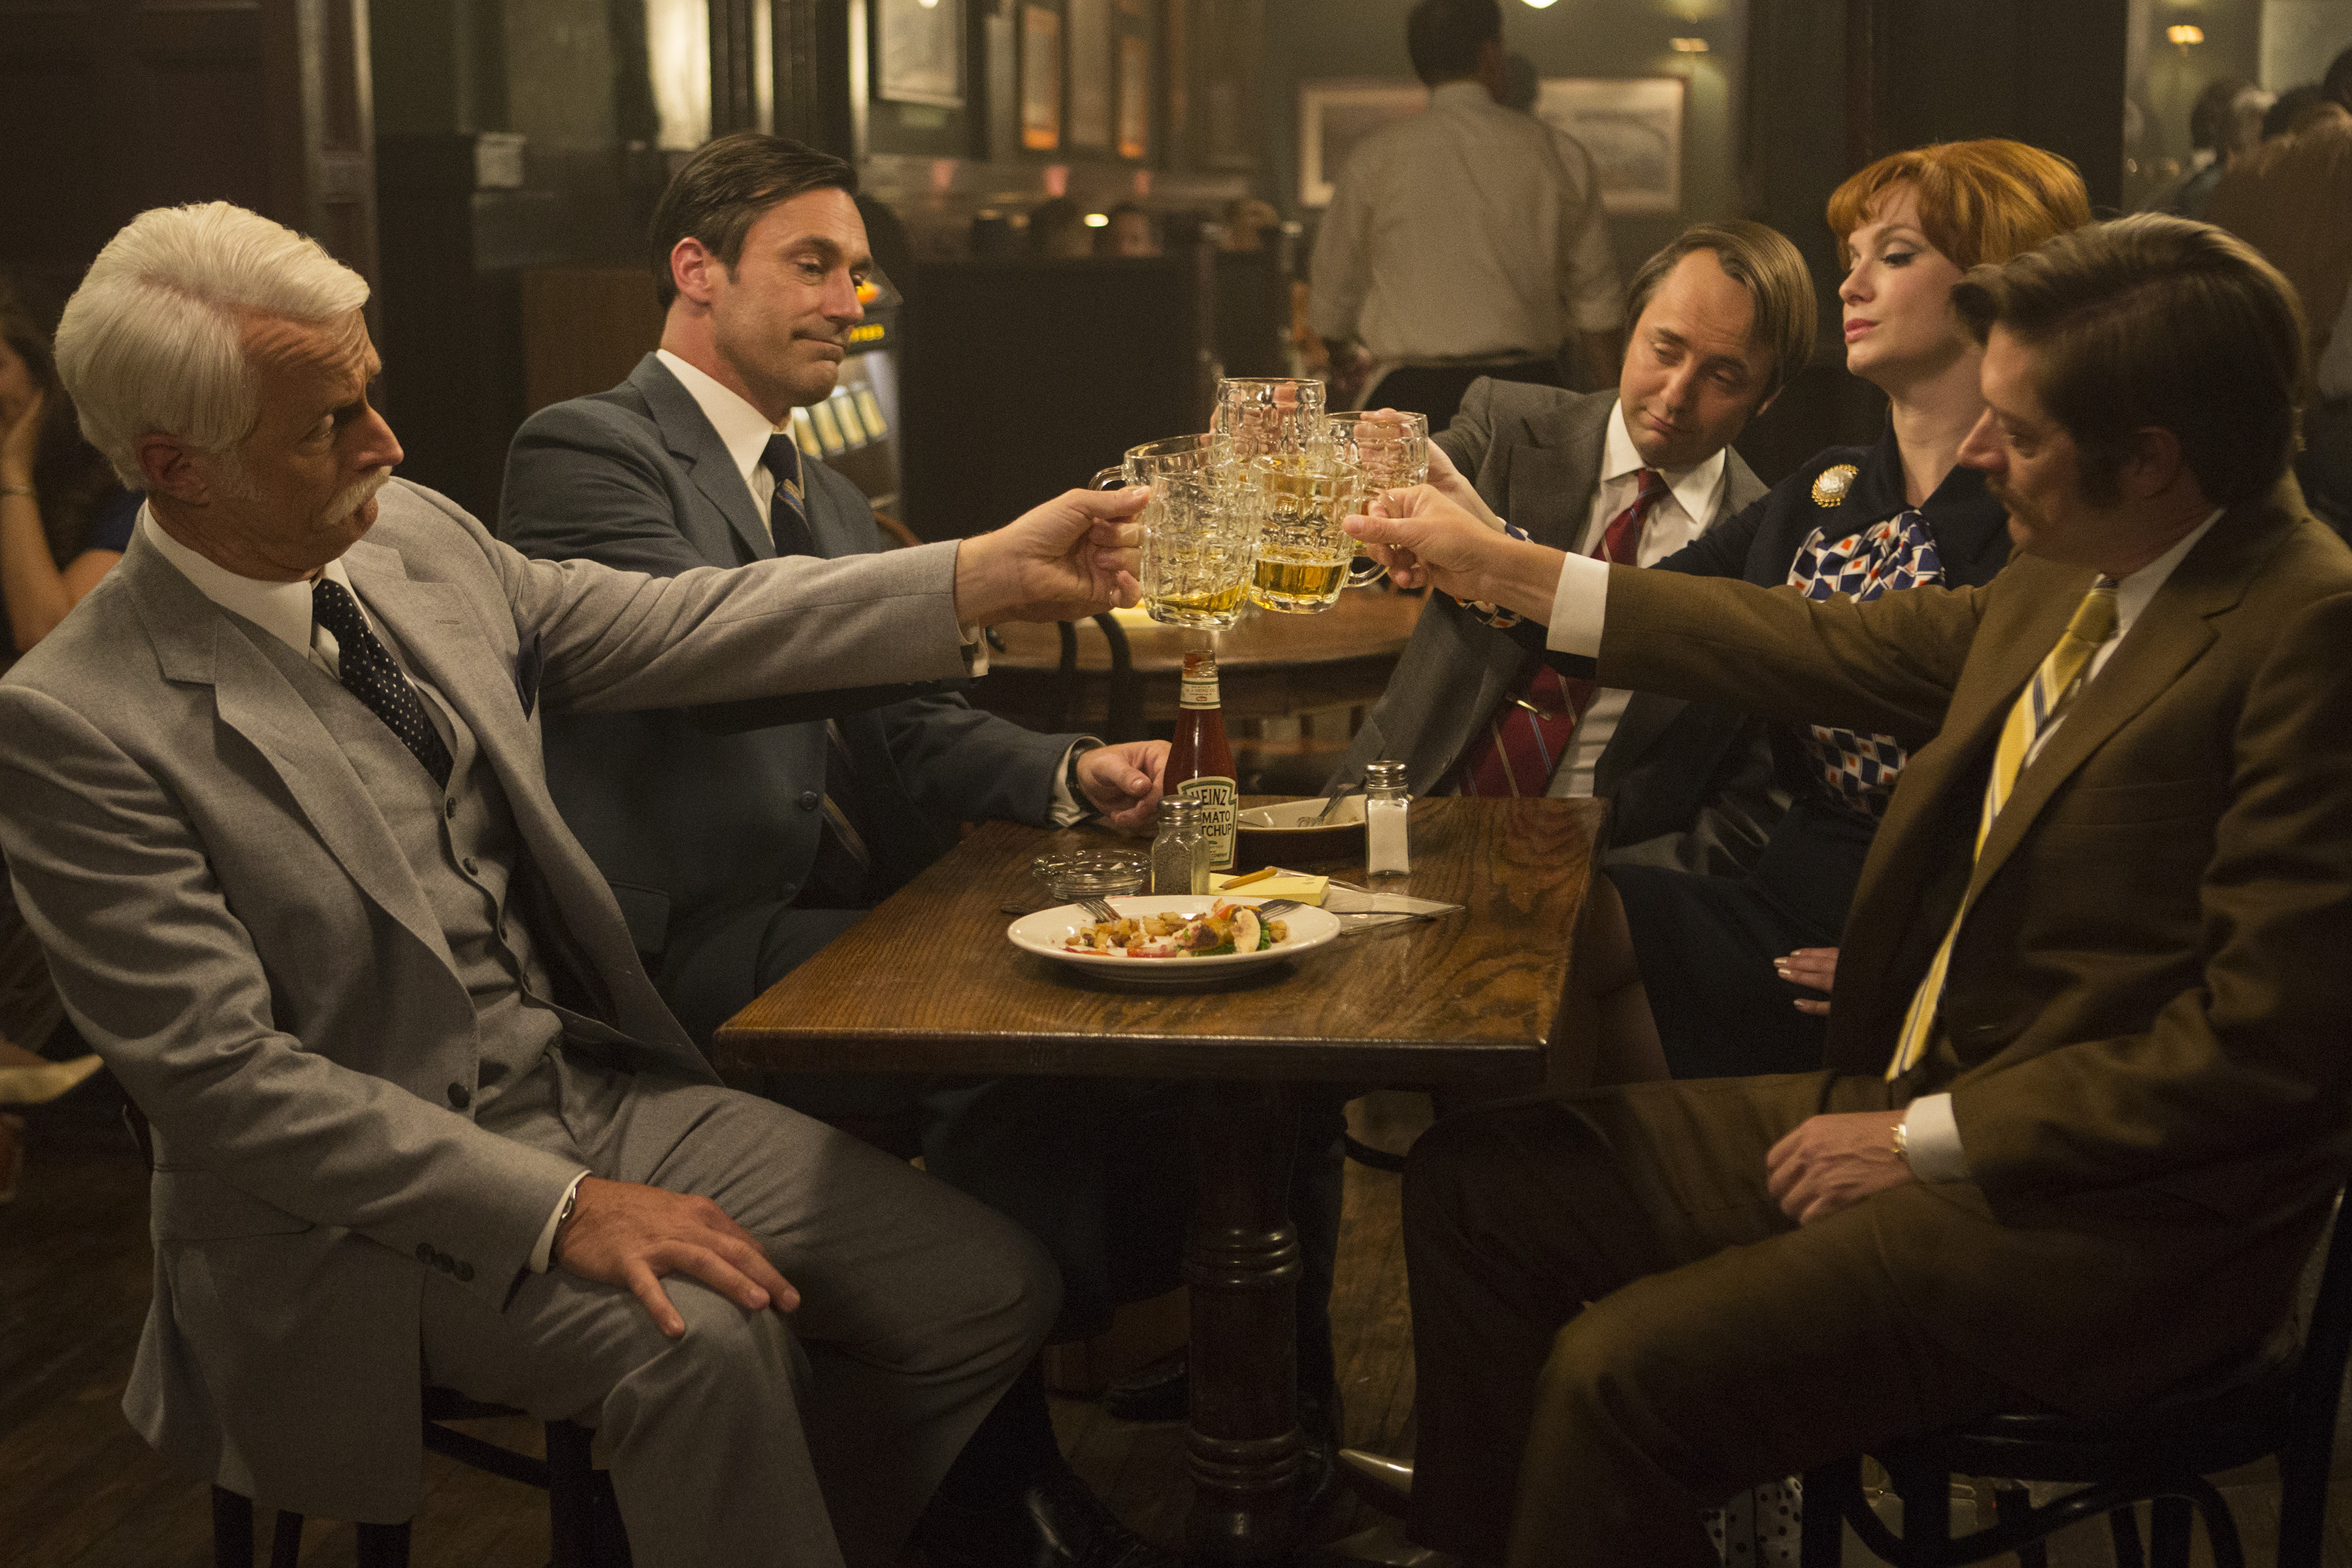 John Slattery as Roger Sterling, Jon Hamm as Don Draper, Vincent Kartheiser as Pete Campbell, Christina Hendricks as Joan Harris and Kevin Rahm as Ted Chaough in Mad Men. (Justina Mintz—AMC Networks)